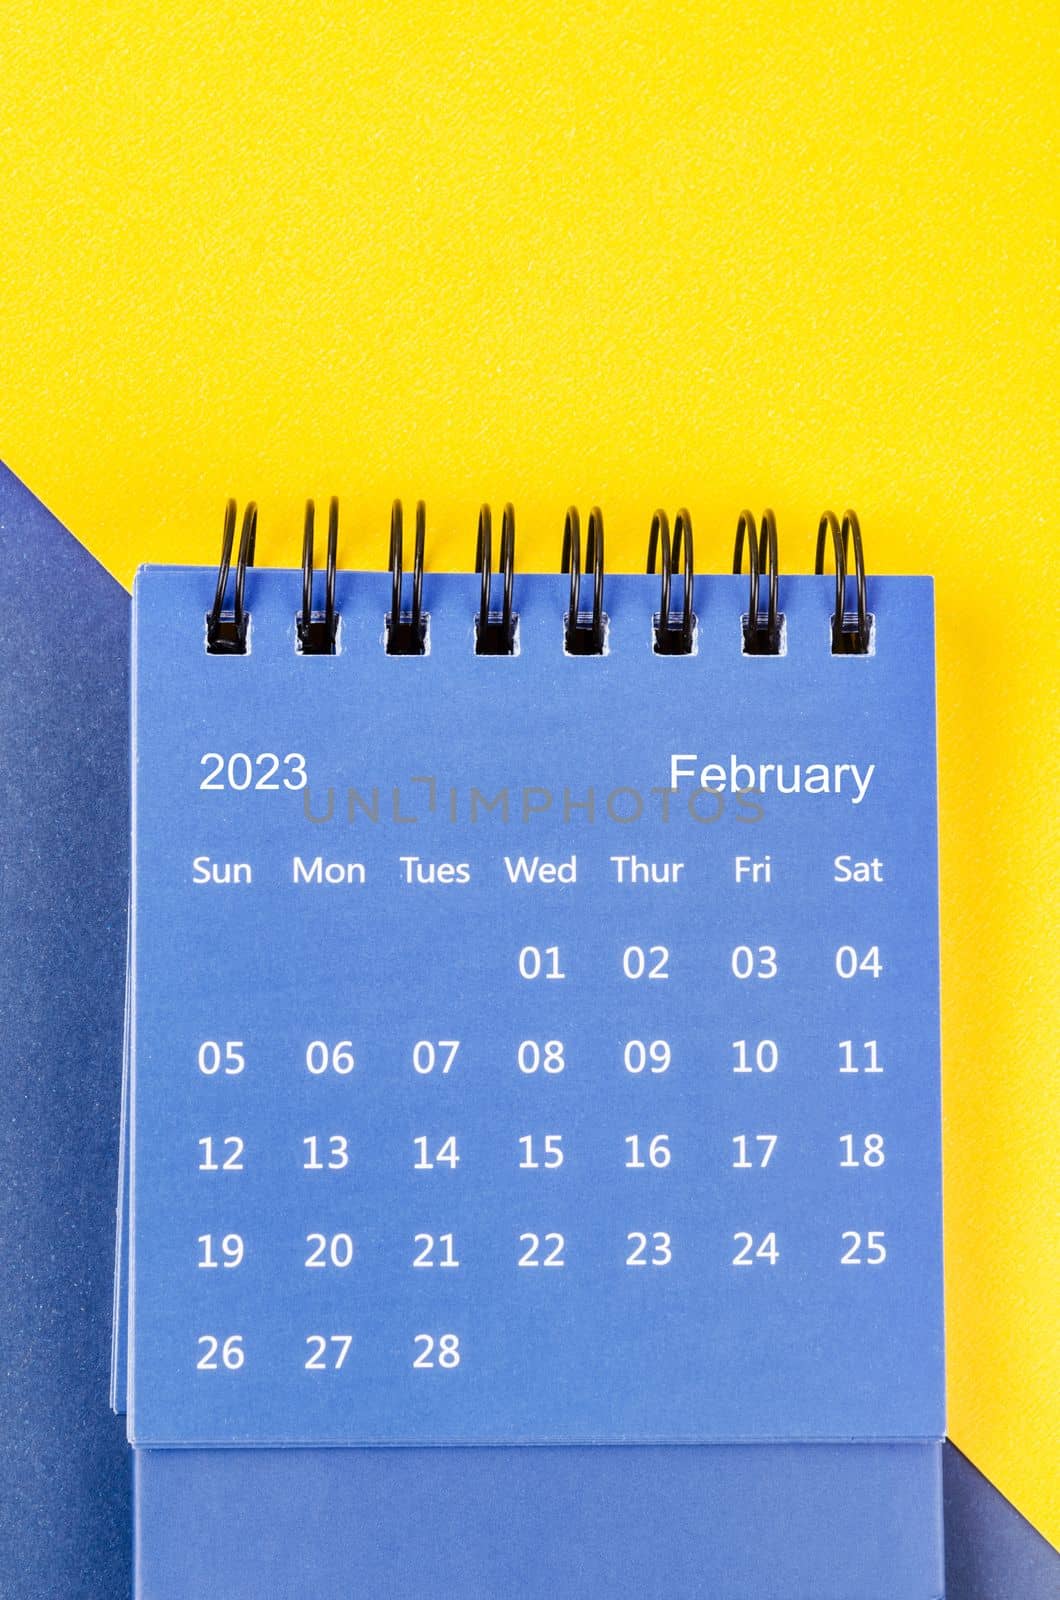 The February 2023 Monthly desk calendar for 2023 year on blue and yellow background. by Gamjai